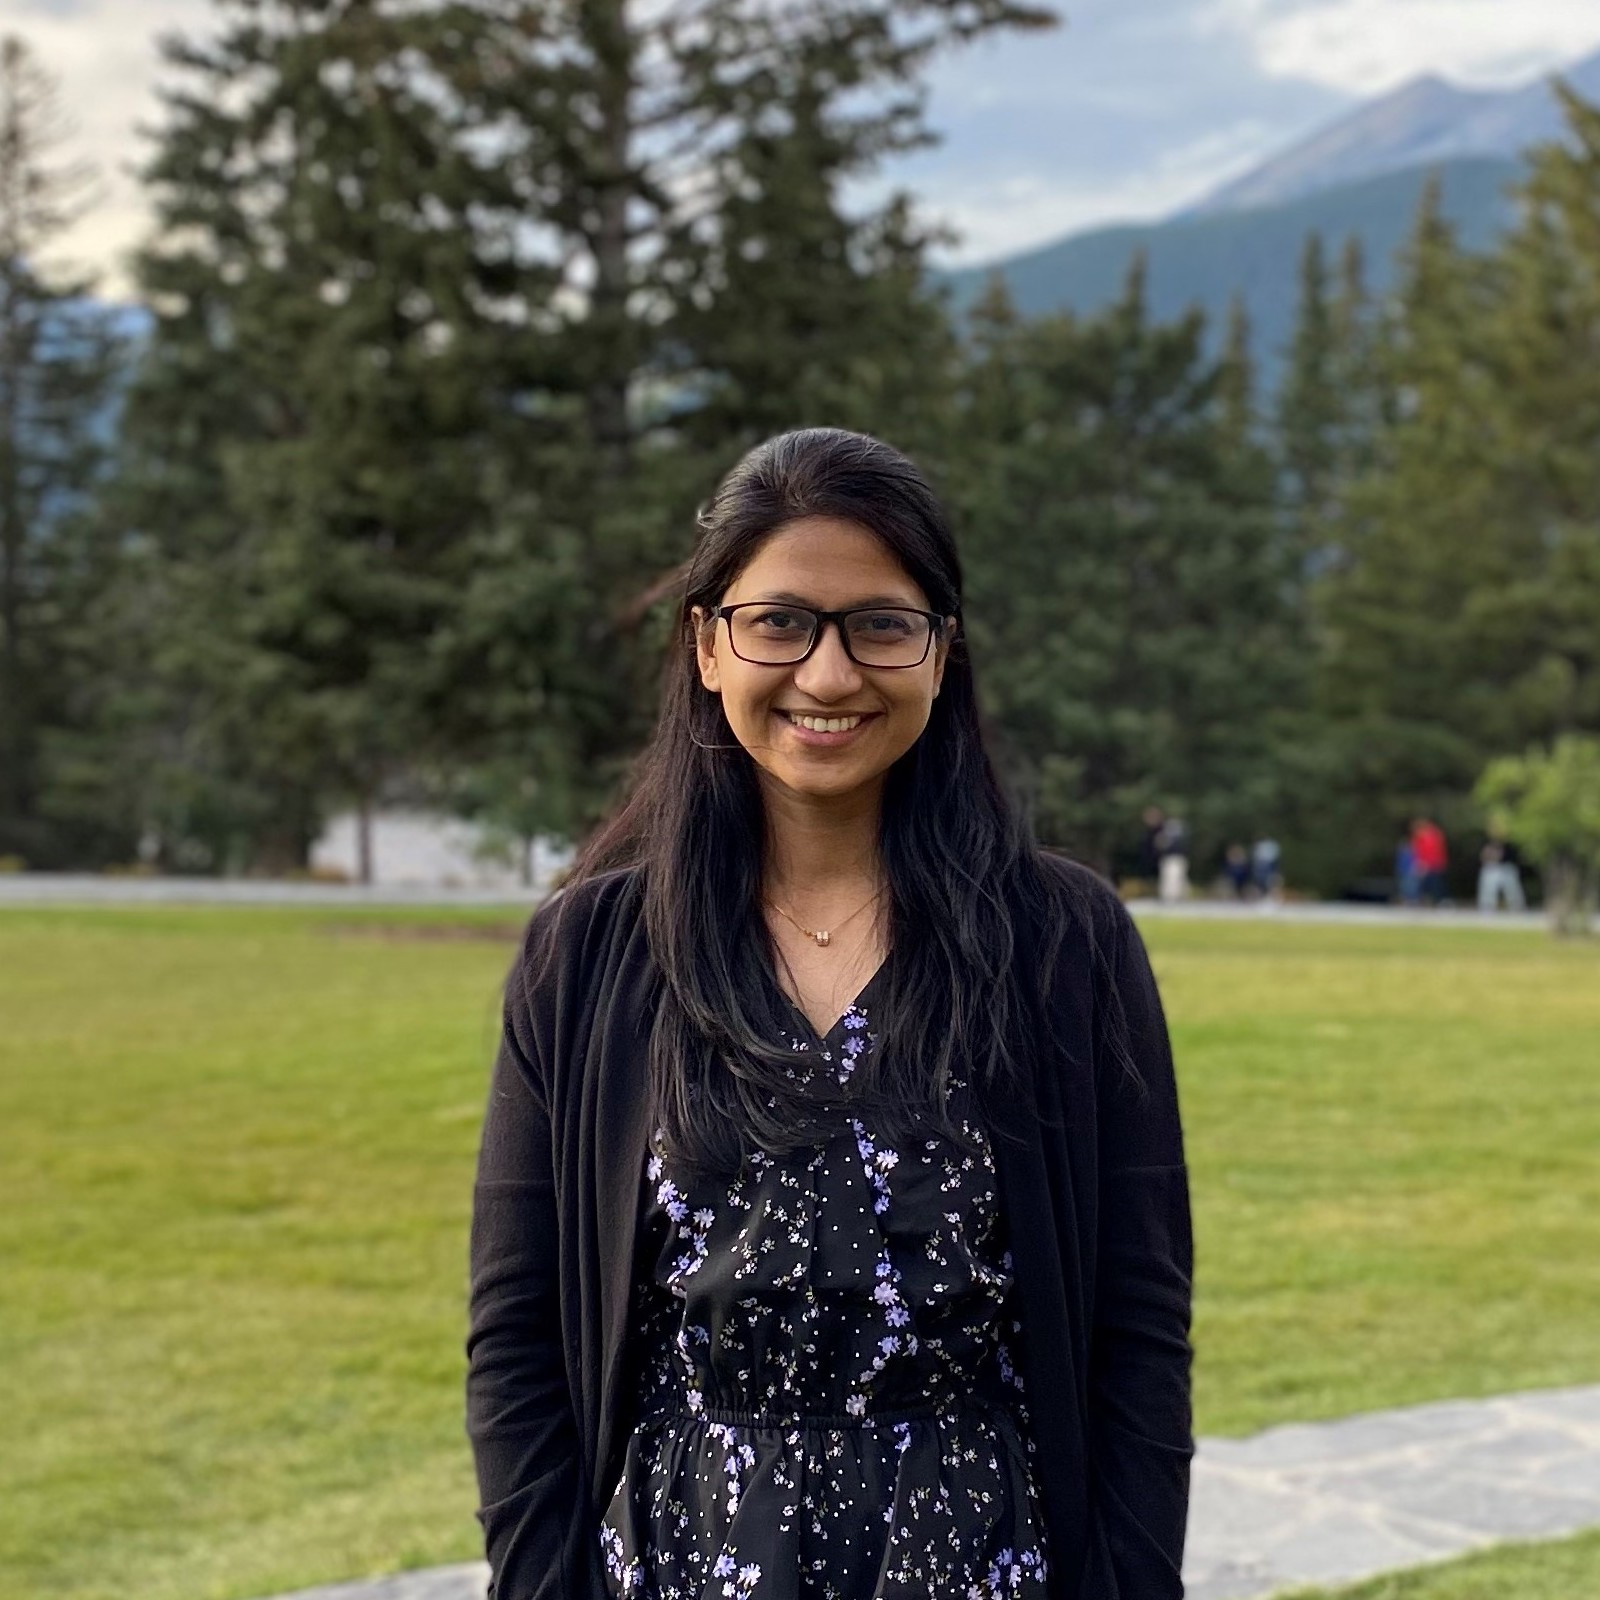 Syeda standing and smiling in front of some grass and trees and with mountain in the background. 